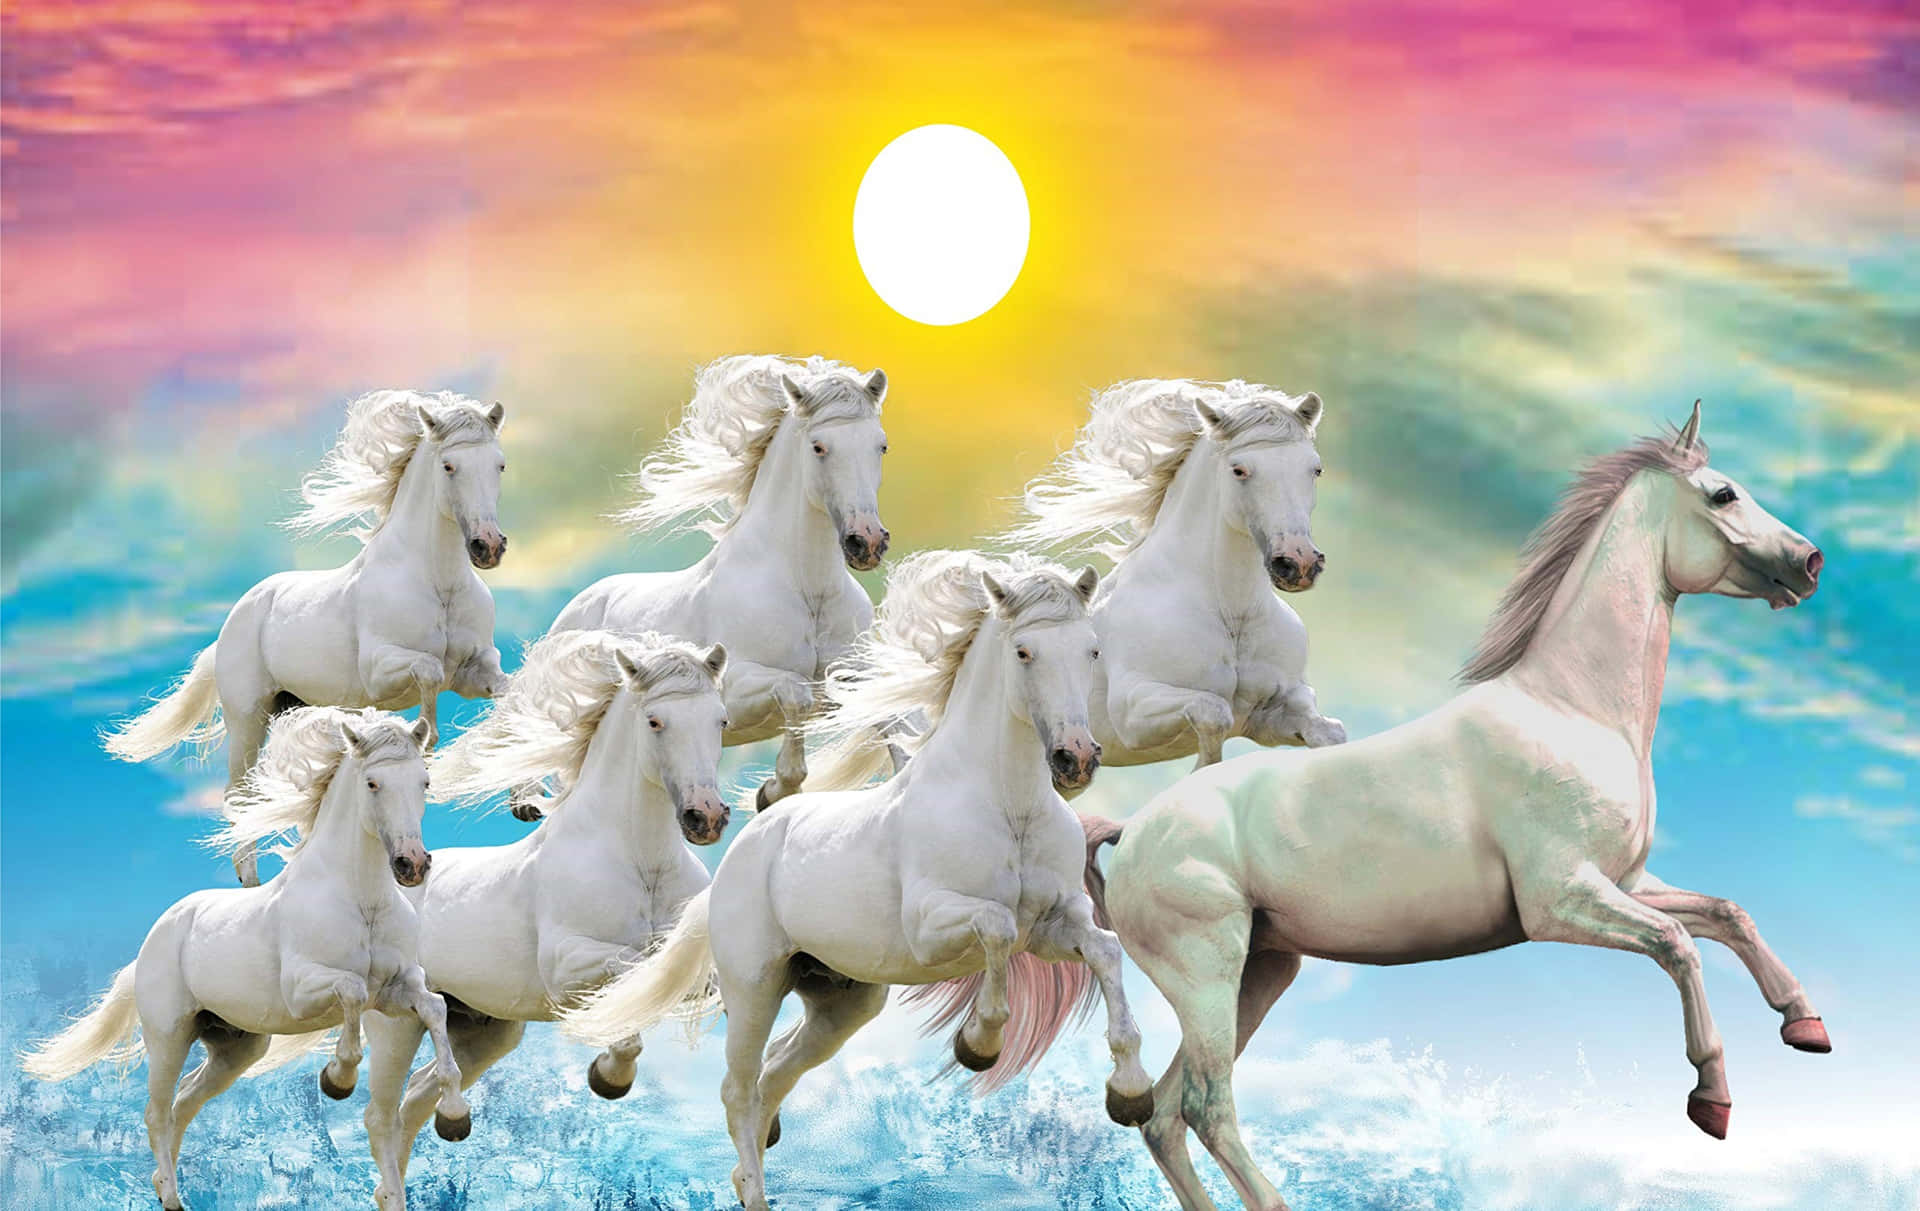 Download 7 White Horses Colorful Sky Wallpaper 